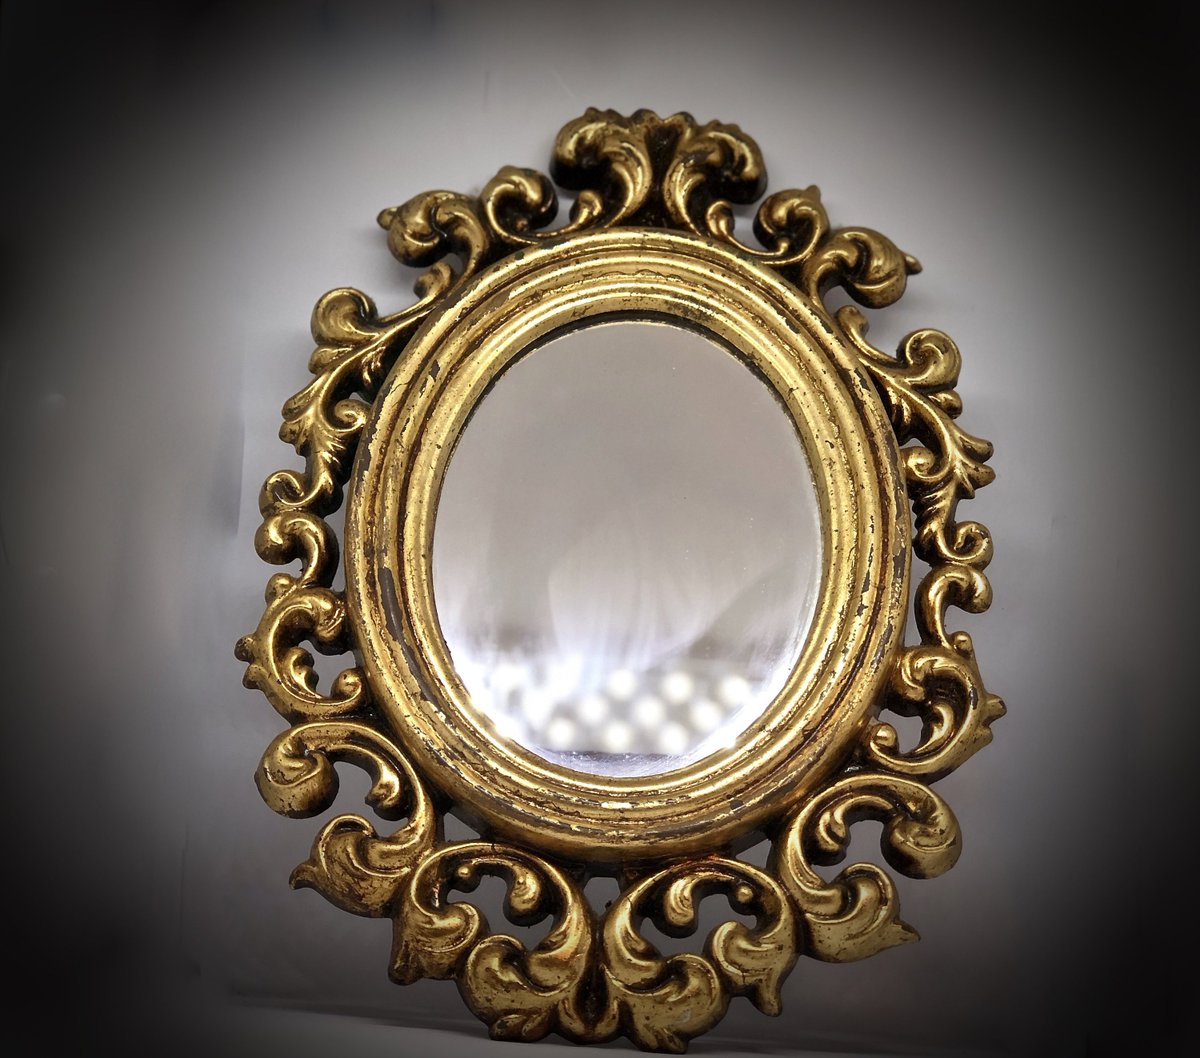 Excited to share the latest addition to my #etsy shop: Gold Hollywood Regency Wall Mirror ~ True Vtg MCM Gold Mirror etsy.me/2IbH0cS #housewares #homedecor #gold #hollywoodregency #romantic #goldmirror #lockermirror #60sdecor #vtgmirror